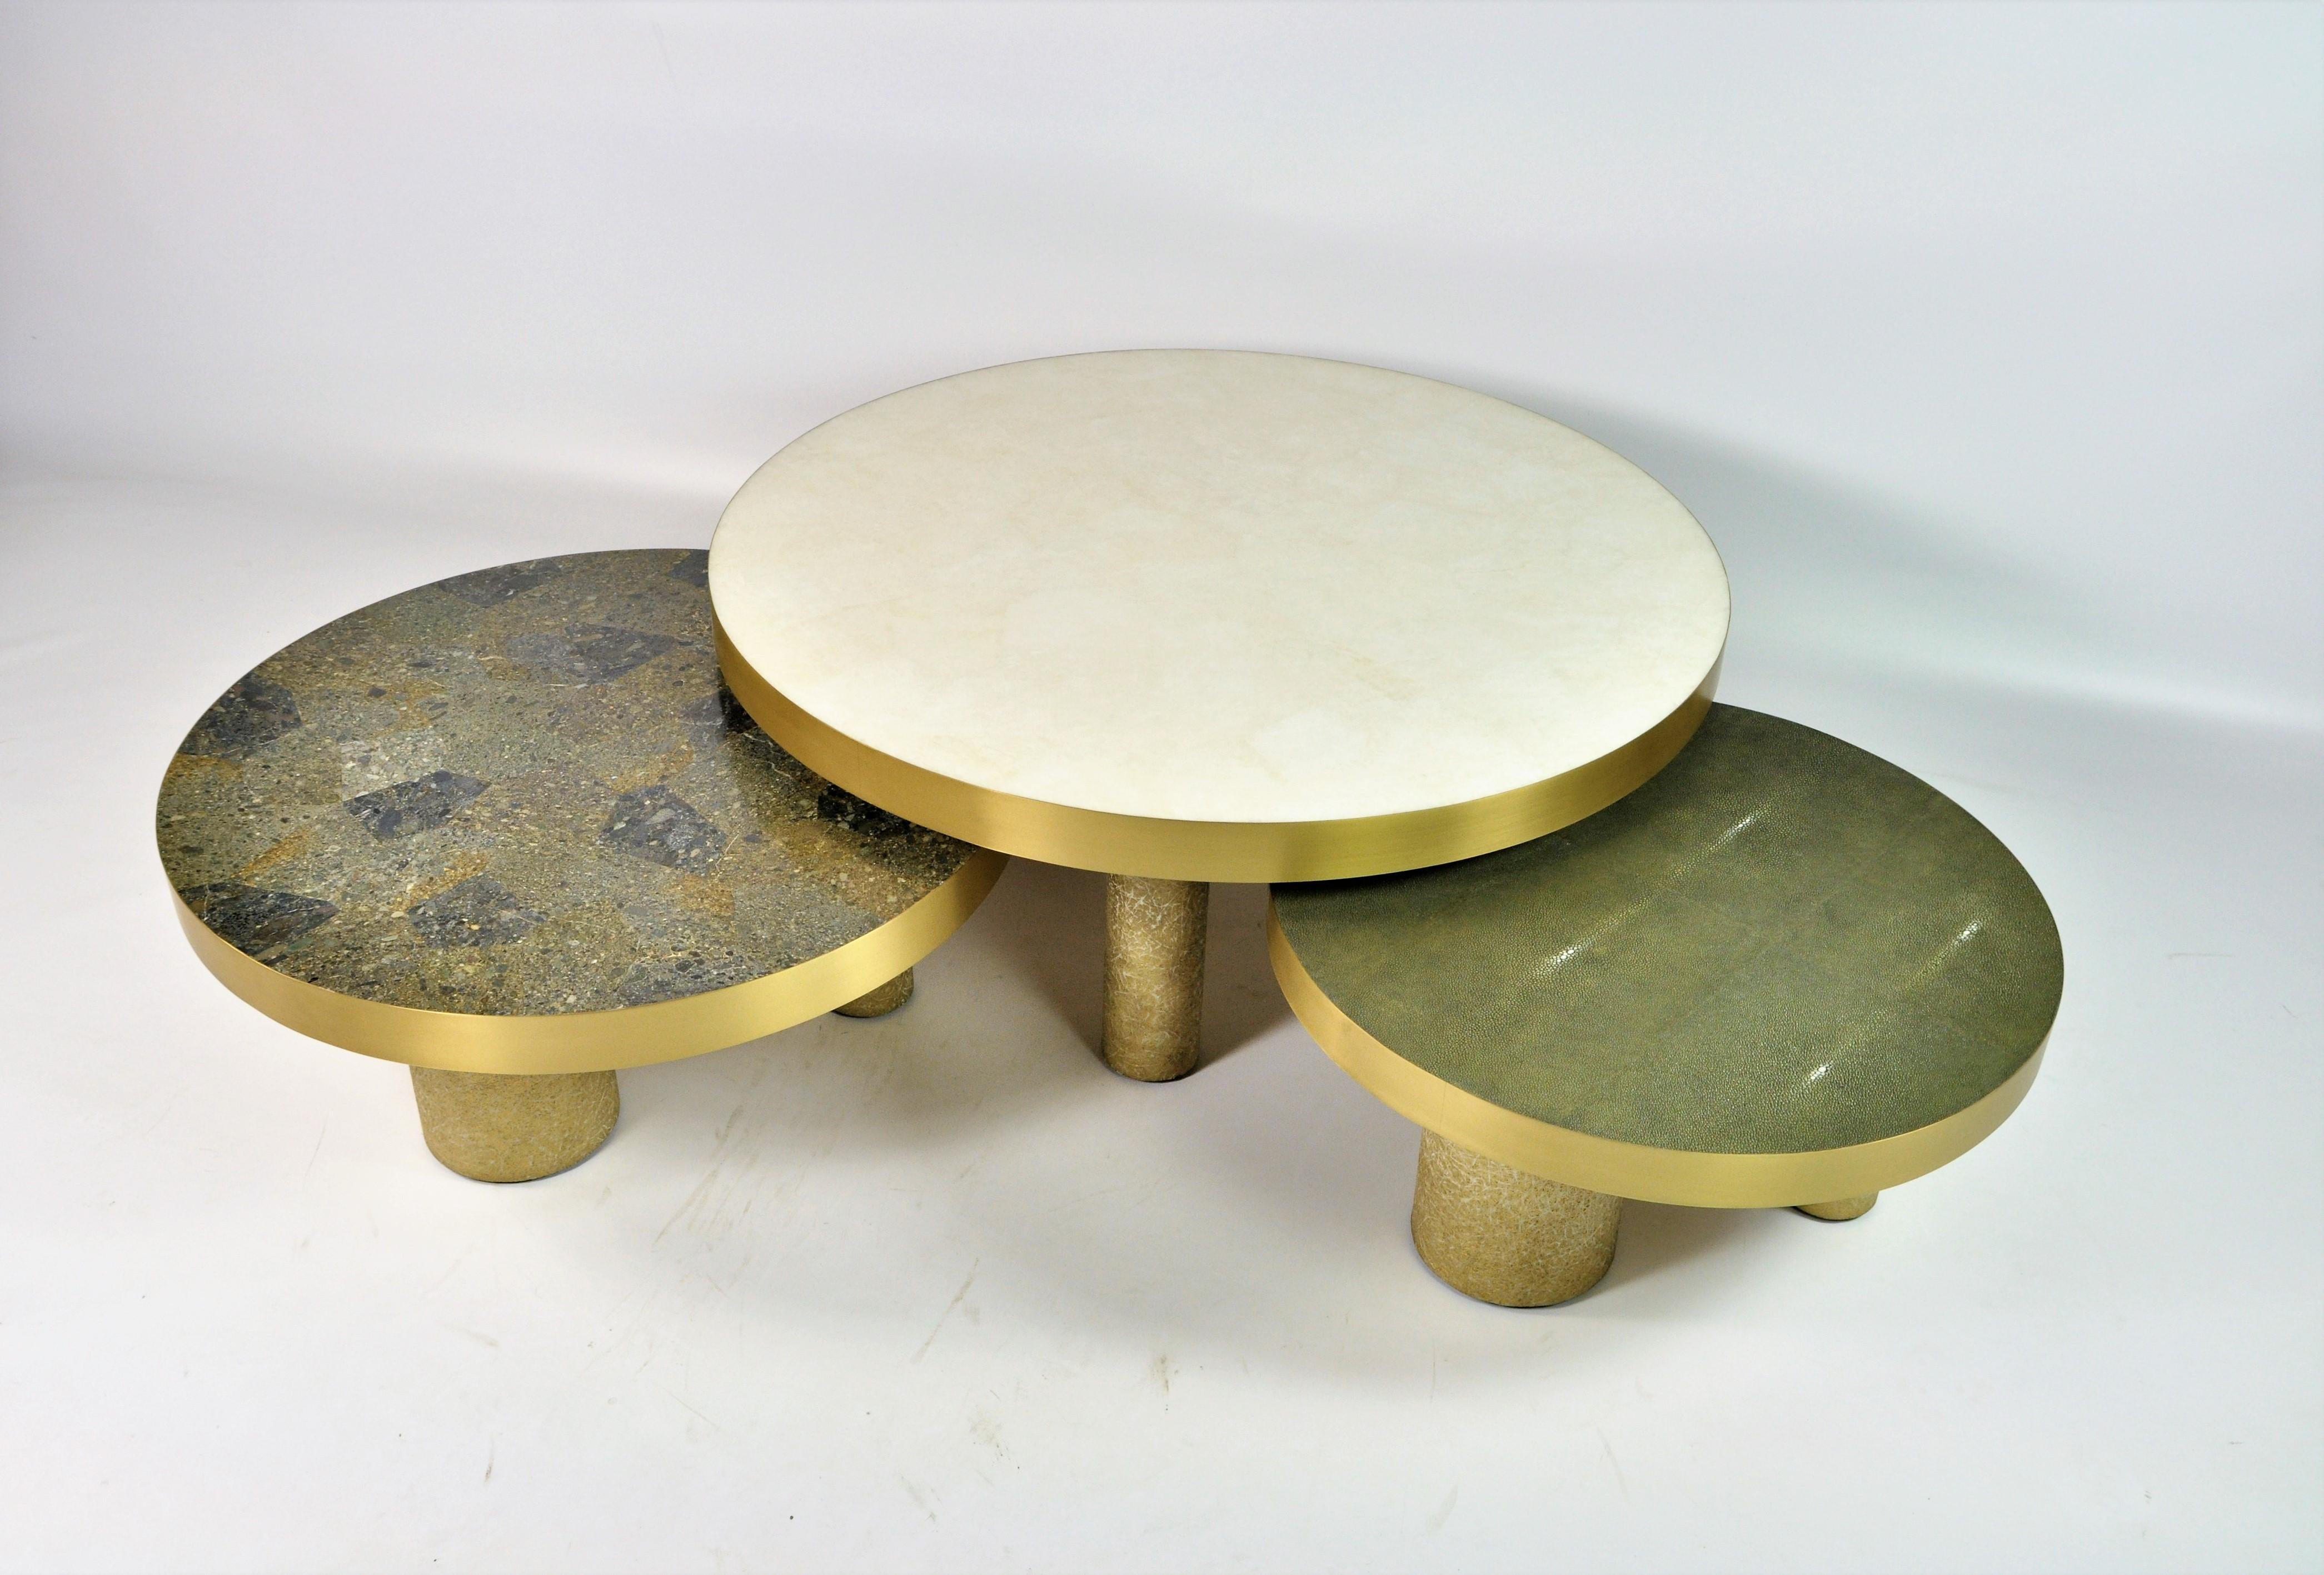 This set of 3 coffee tables is made of various inlaid materials.
These modular tables can be setted up following your wishes.
The center piece is covered with a polished white rock crystal marquetry, the side tables are inlaid with shagreen and